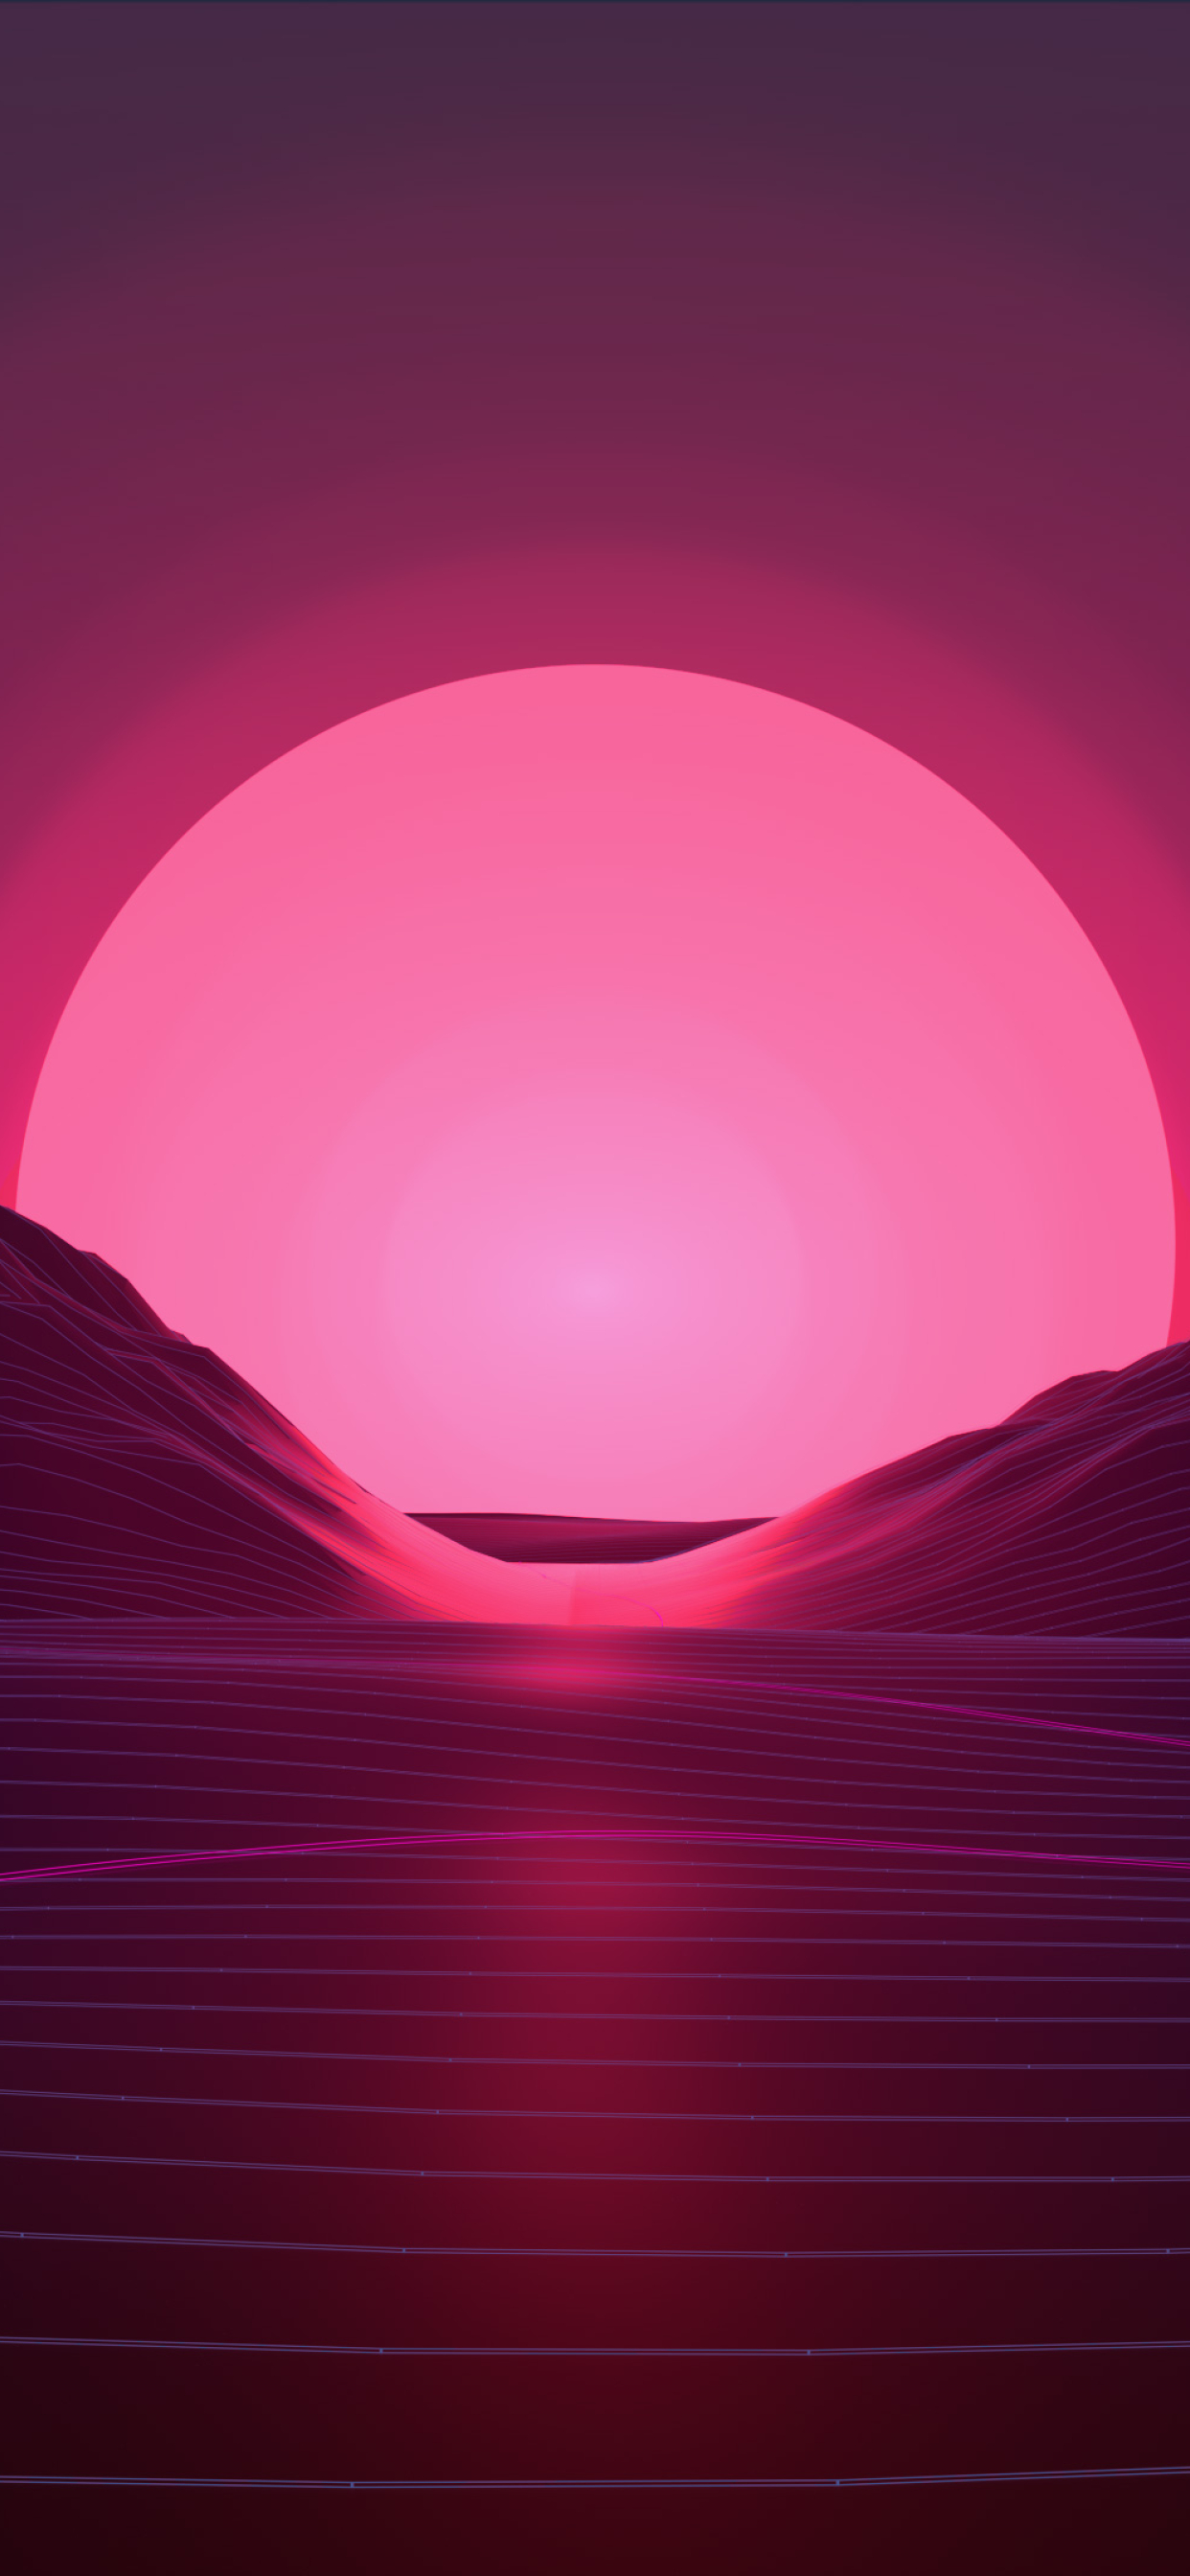 1242x2688 Neon Sunset Iphone Xs Max Wallpaper Hd Artist 4k Wallpapers Images Photos And Background